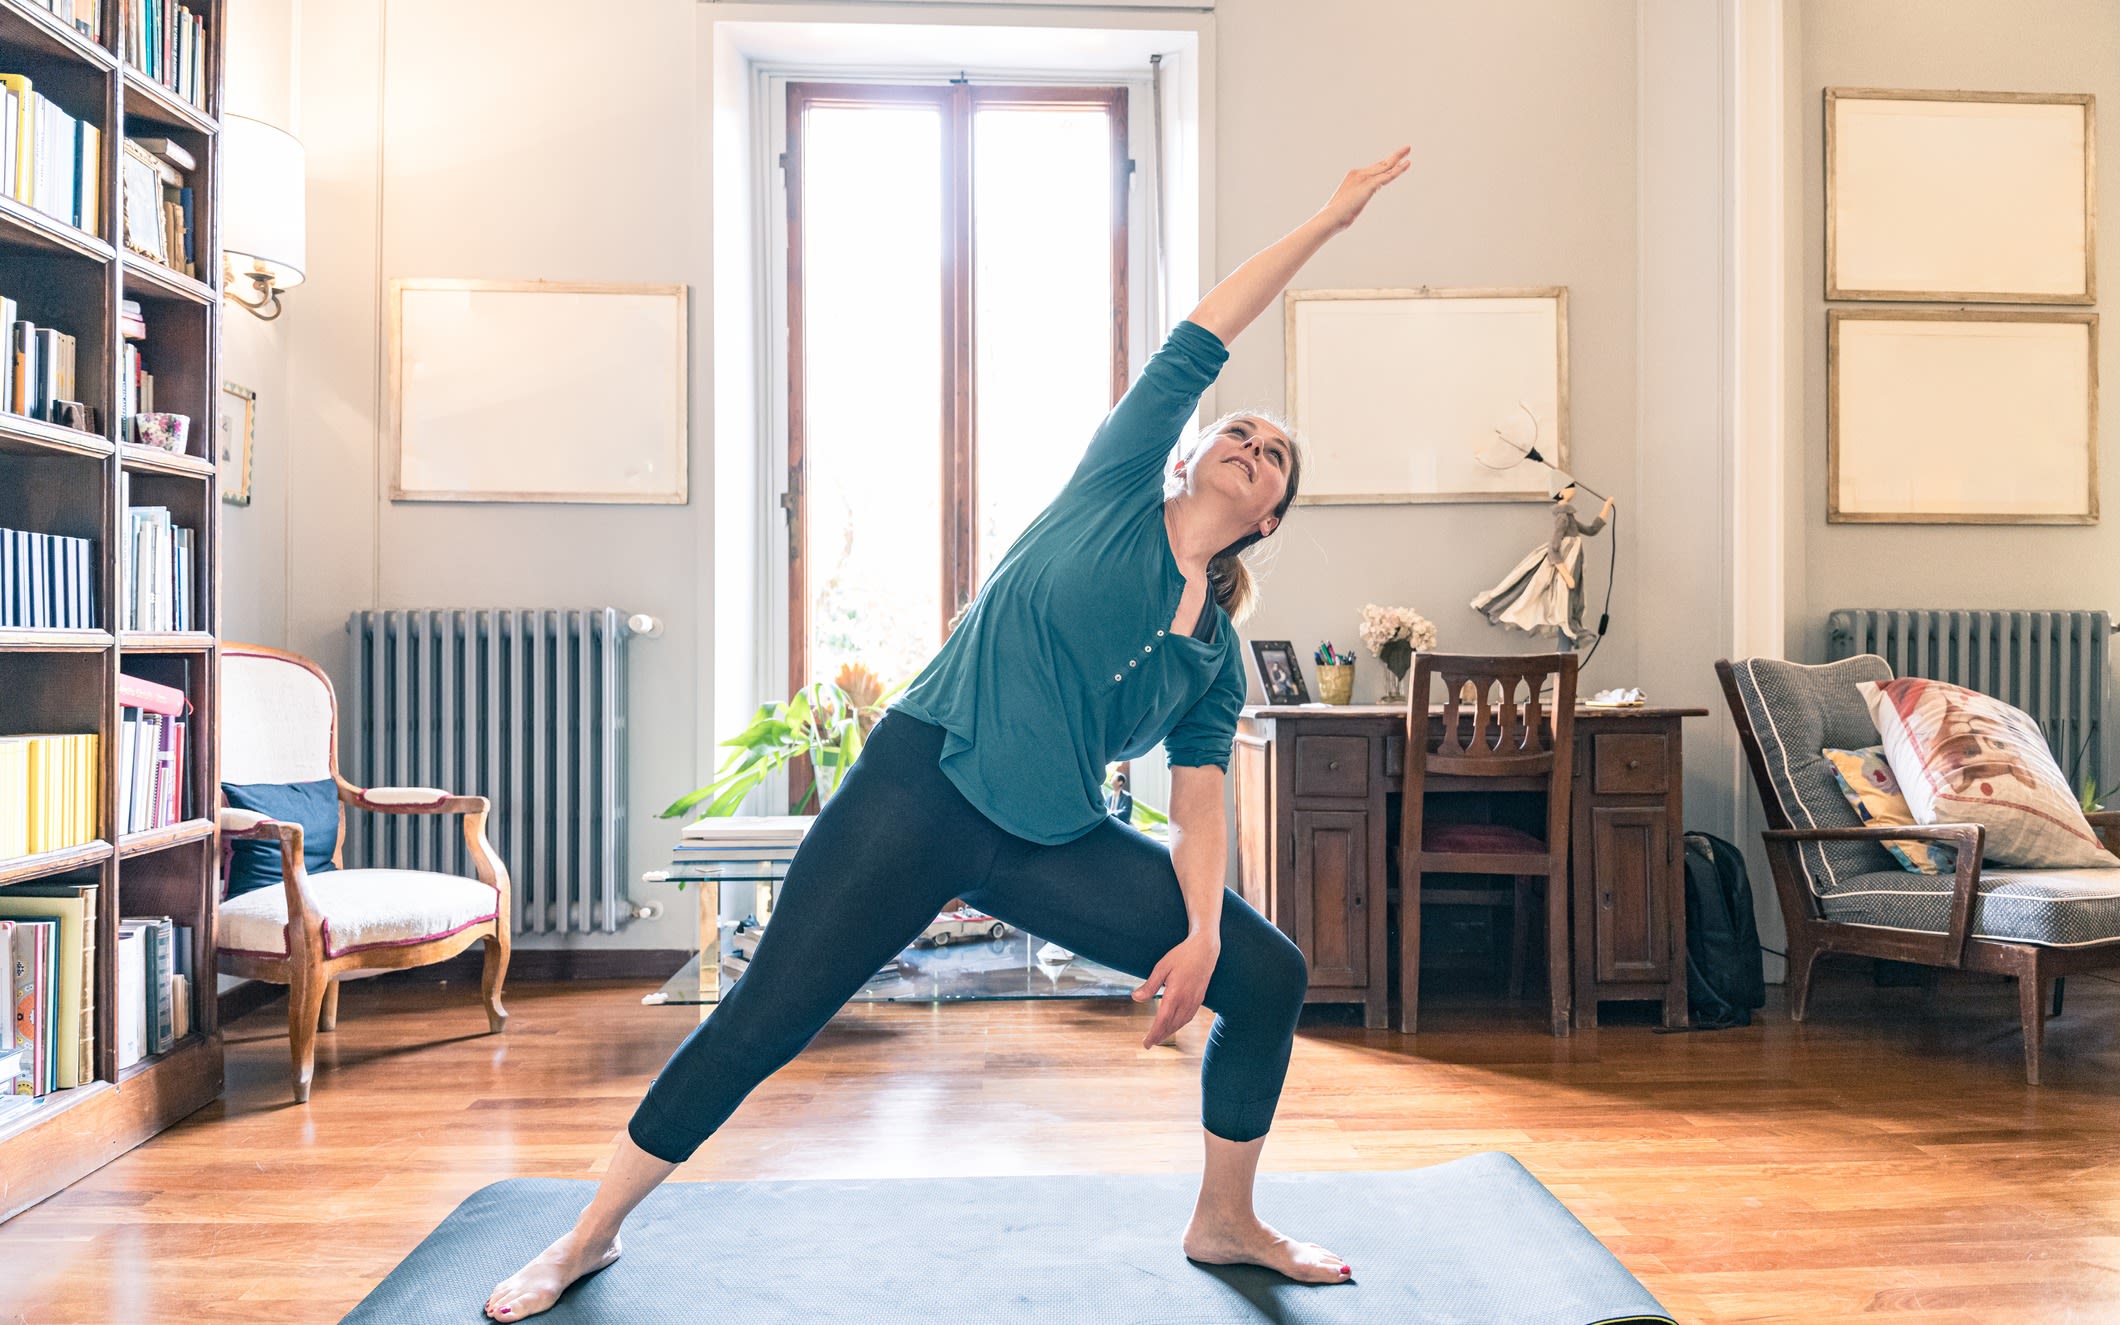 A woman doing yoga at home